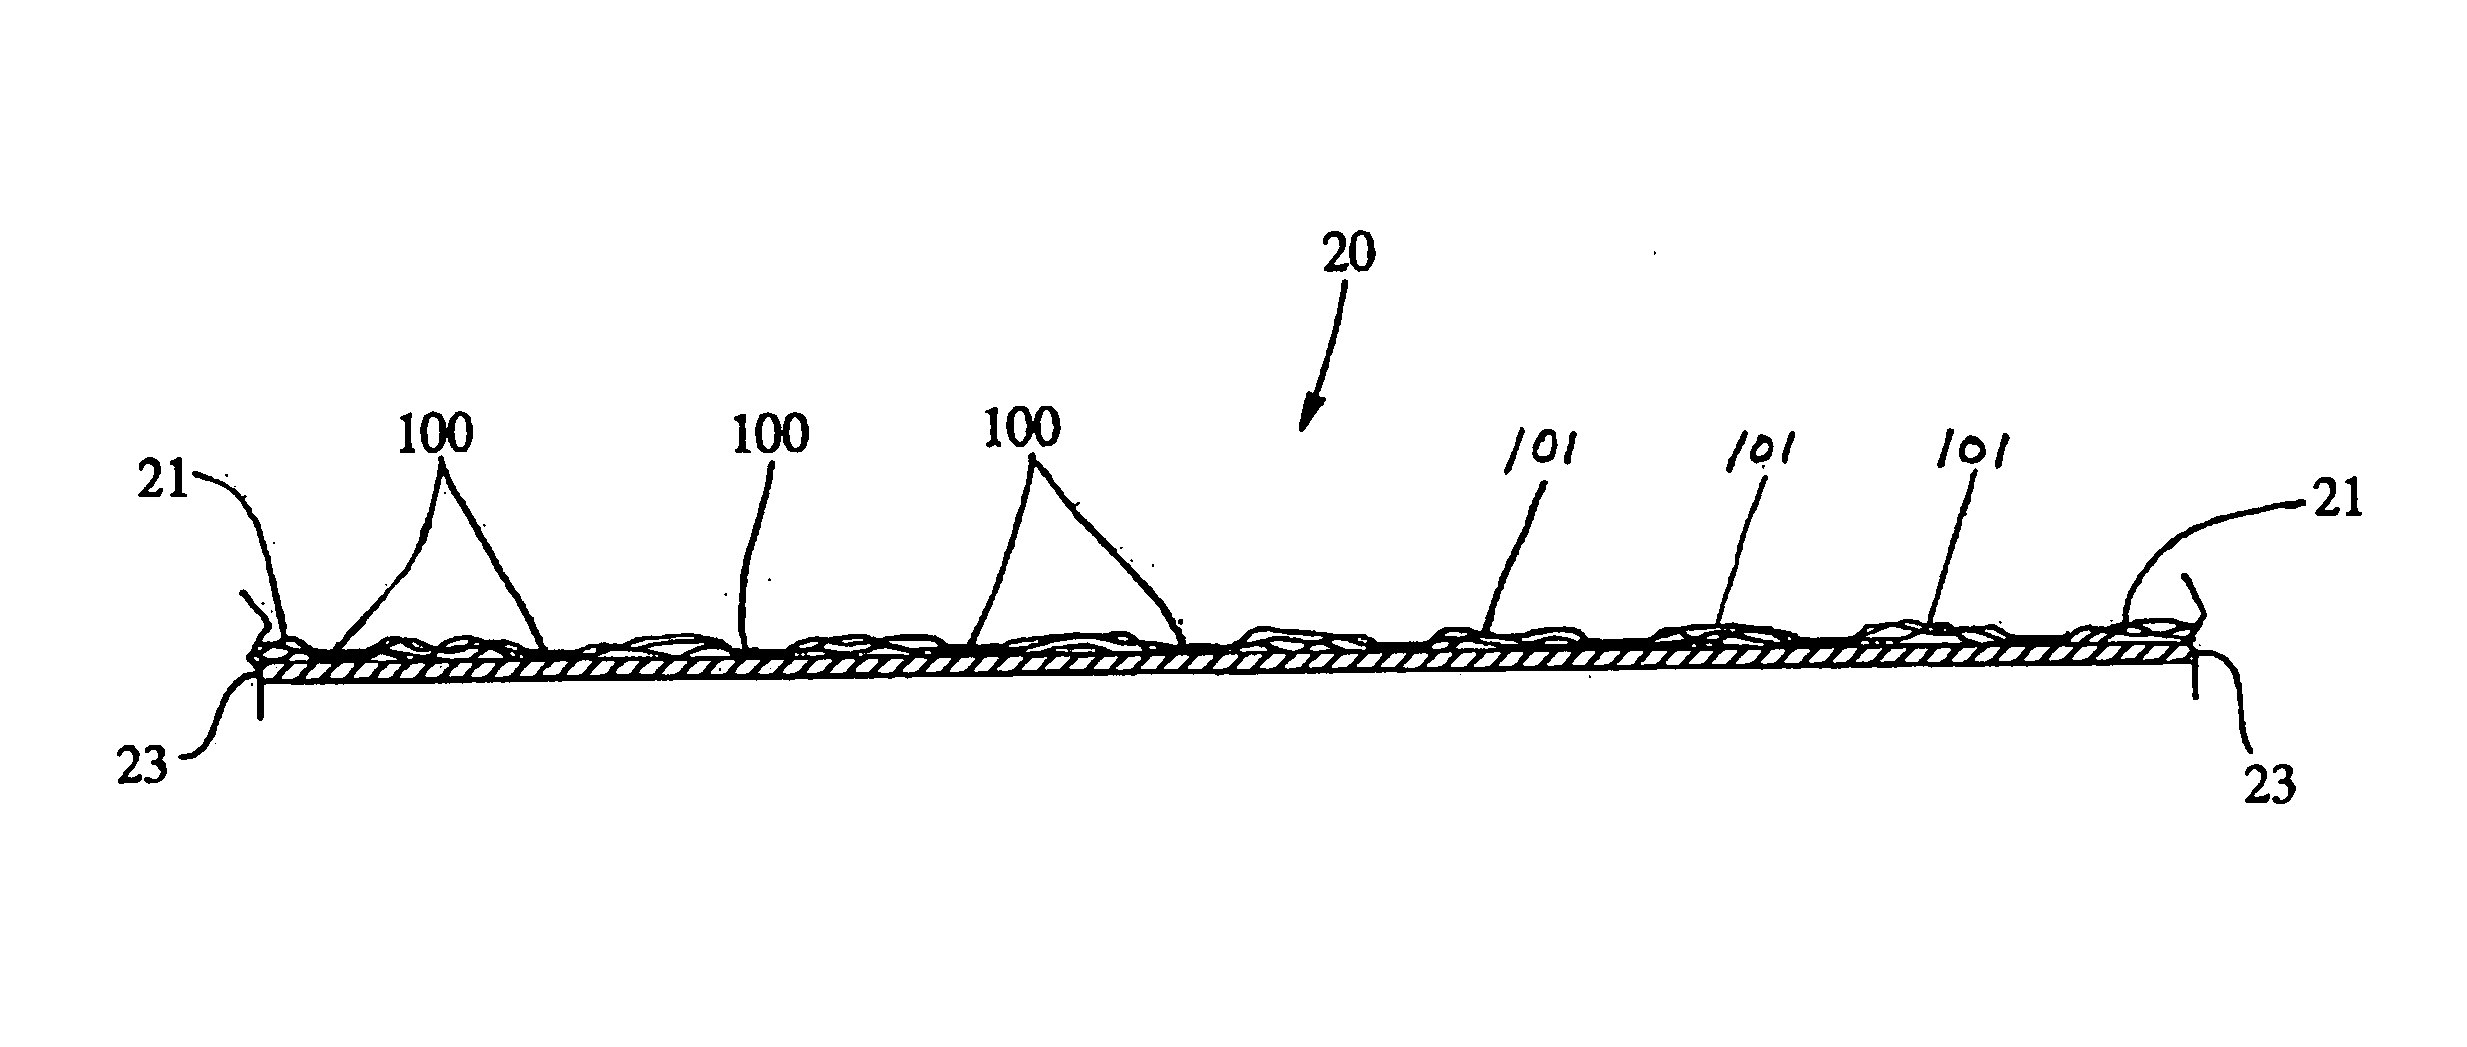 Nonwoven webs with enhanced loft and process for forming such webs